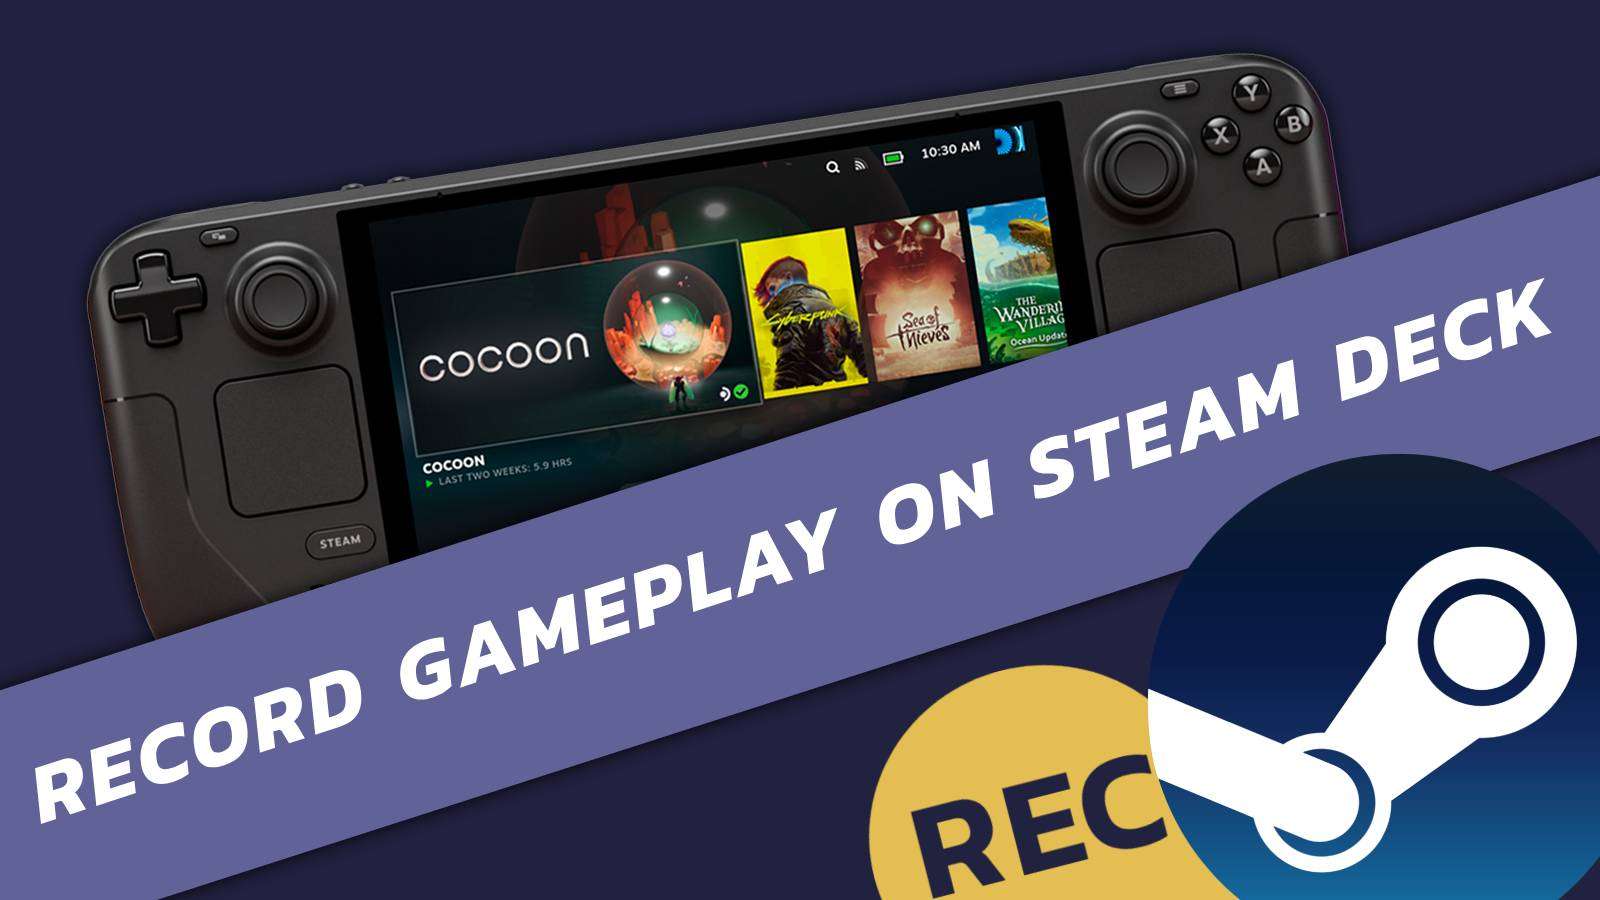 An image of the Steam Deck with a banner across it, and the Steam logo in the bottom right corner.